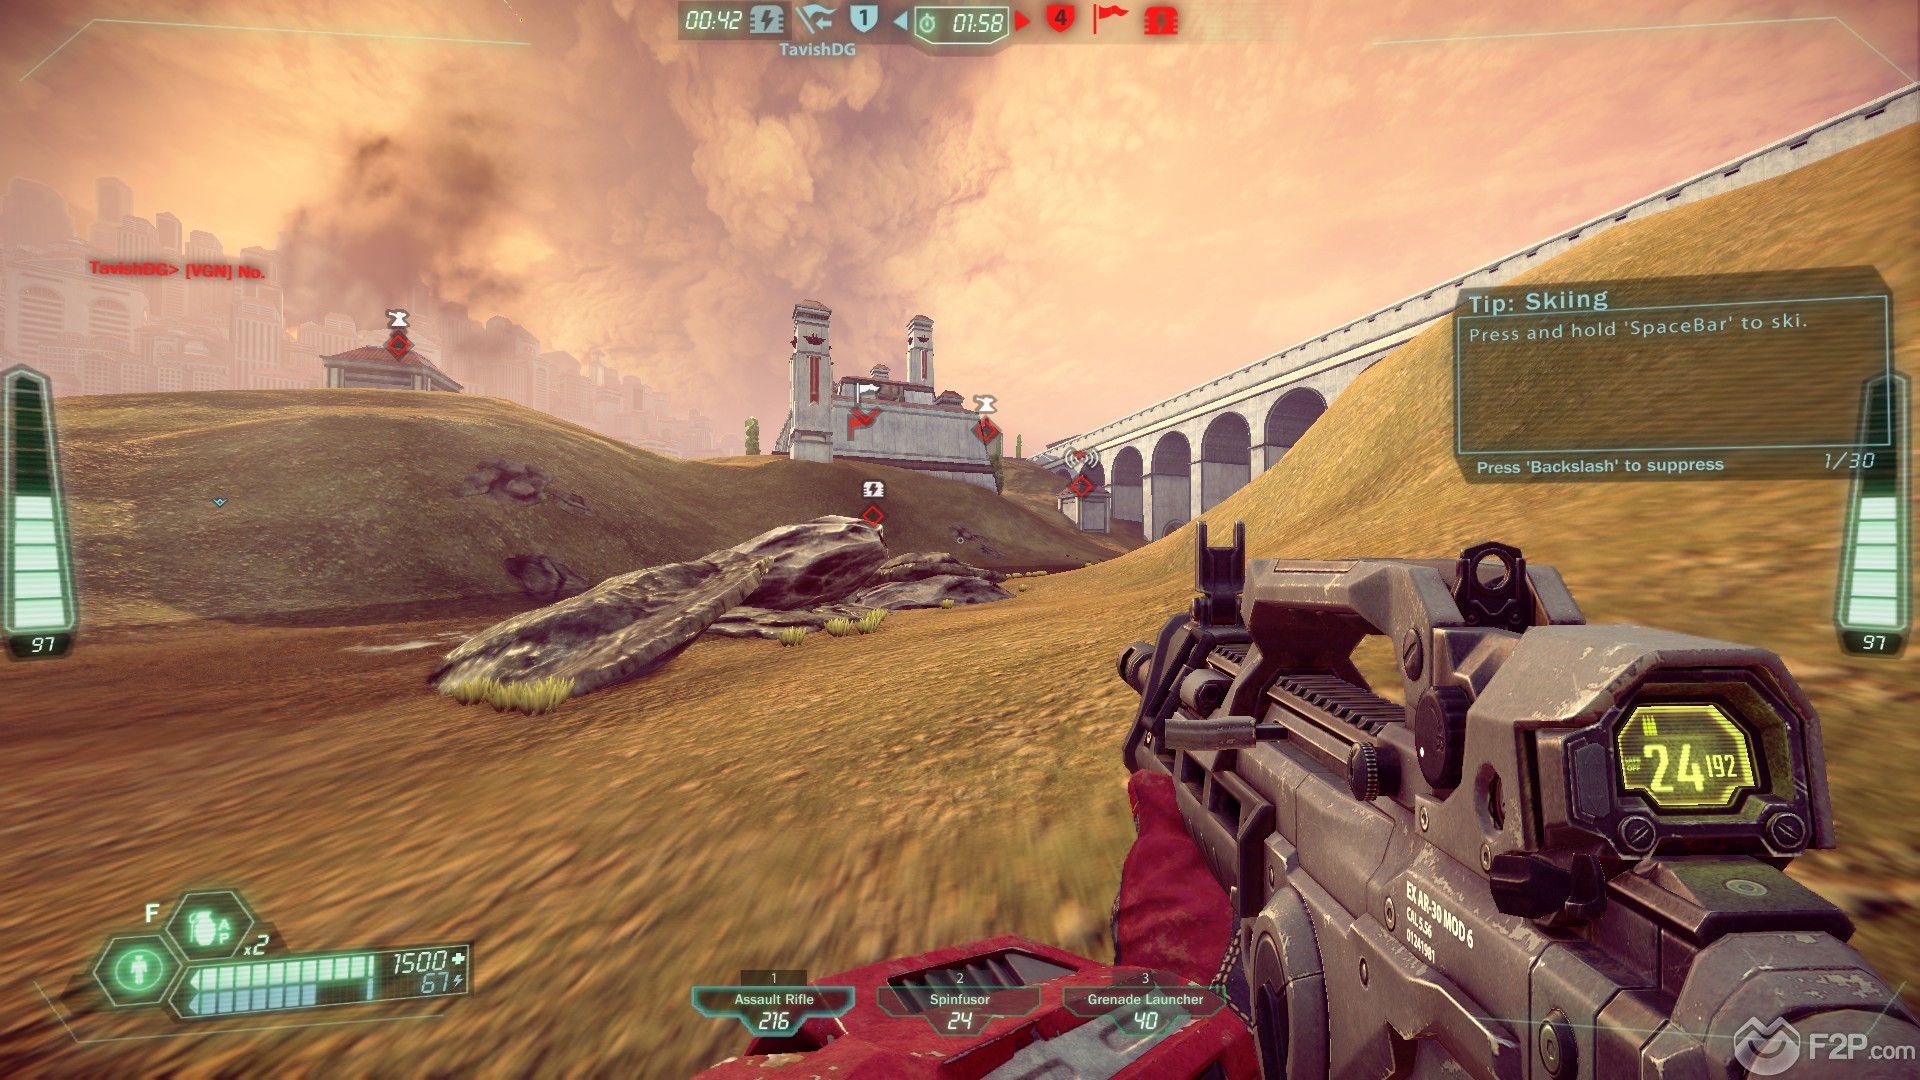 Tribes ascend